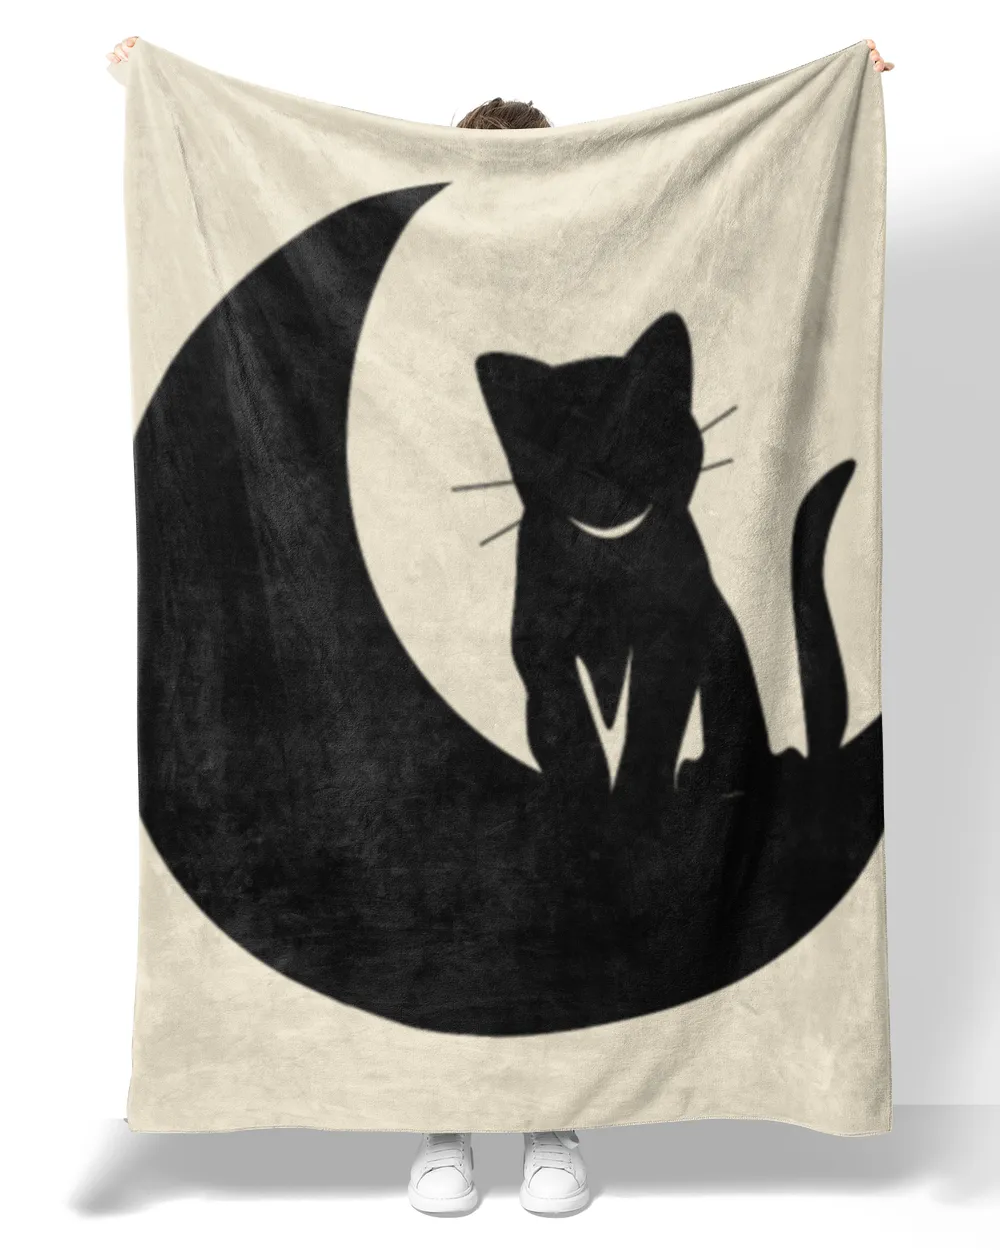 cute cat on the moon moonshine cat